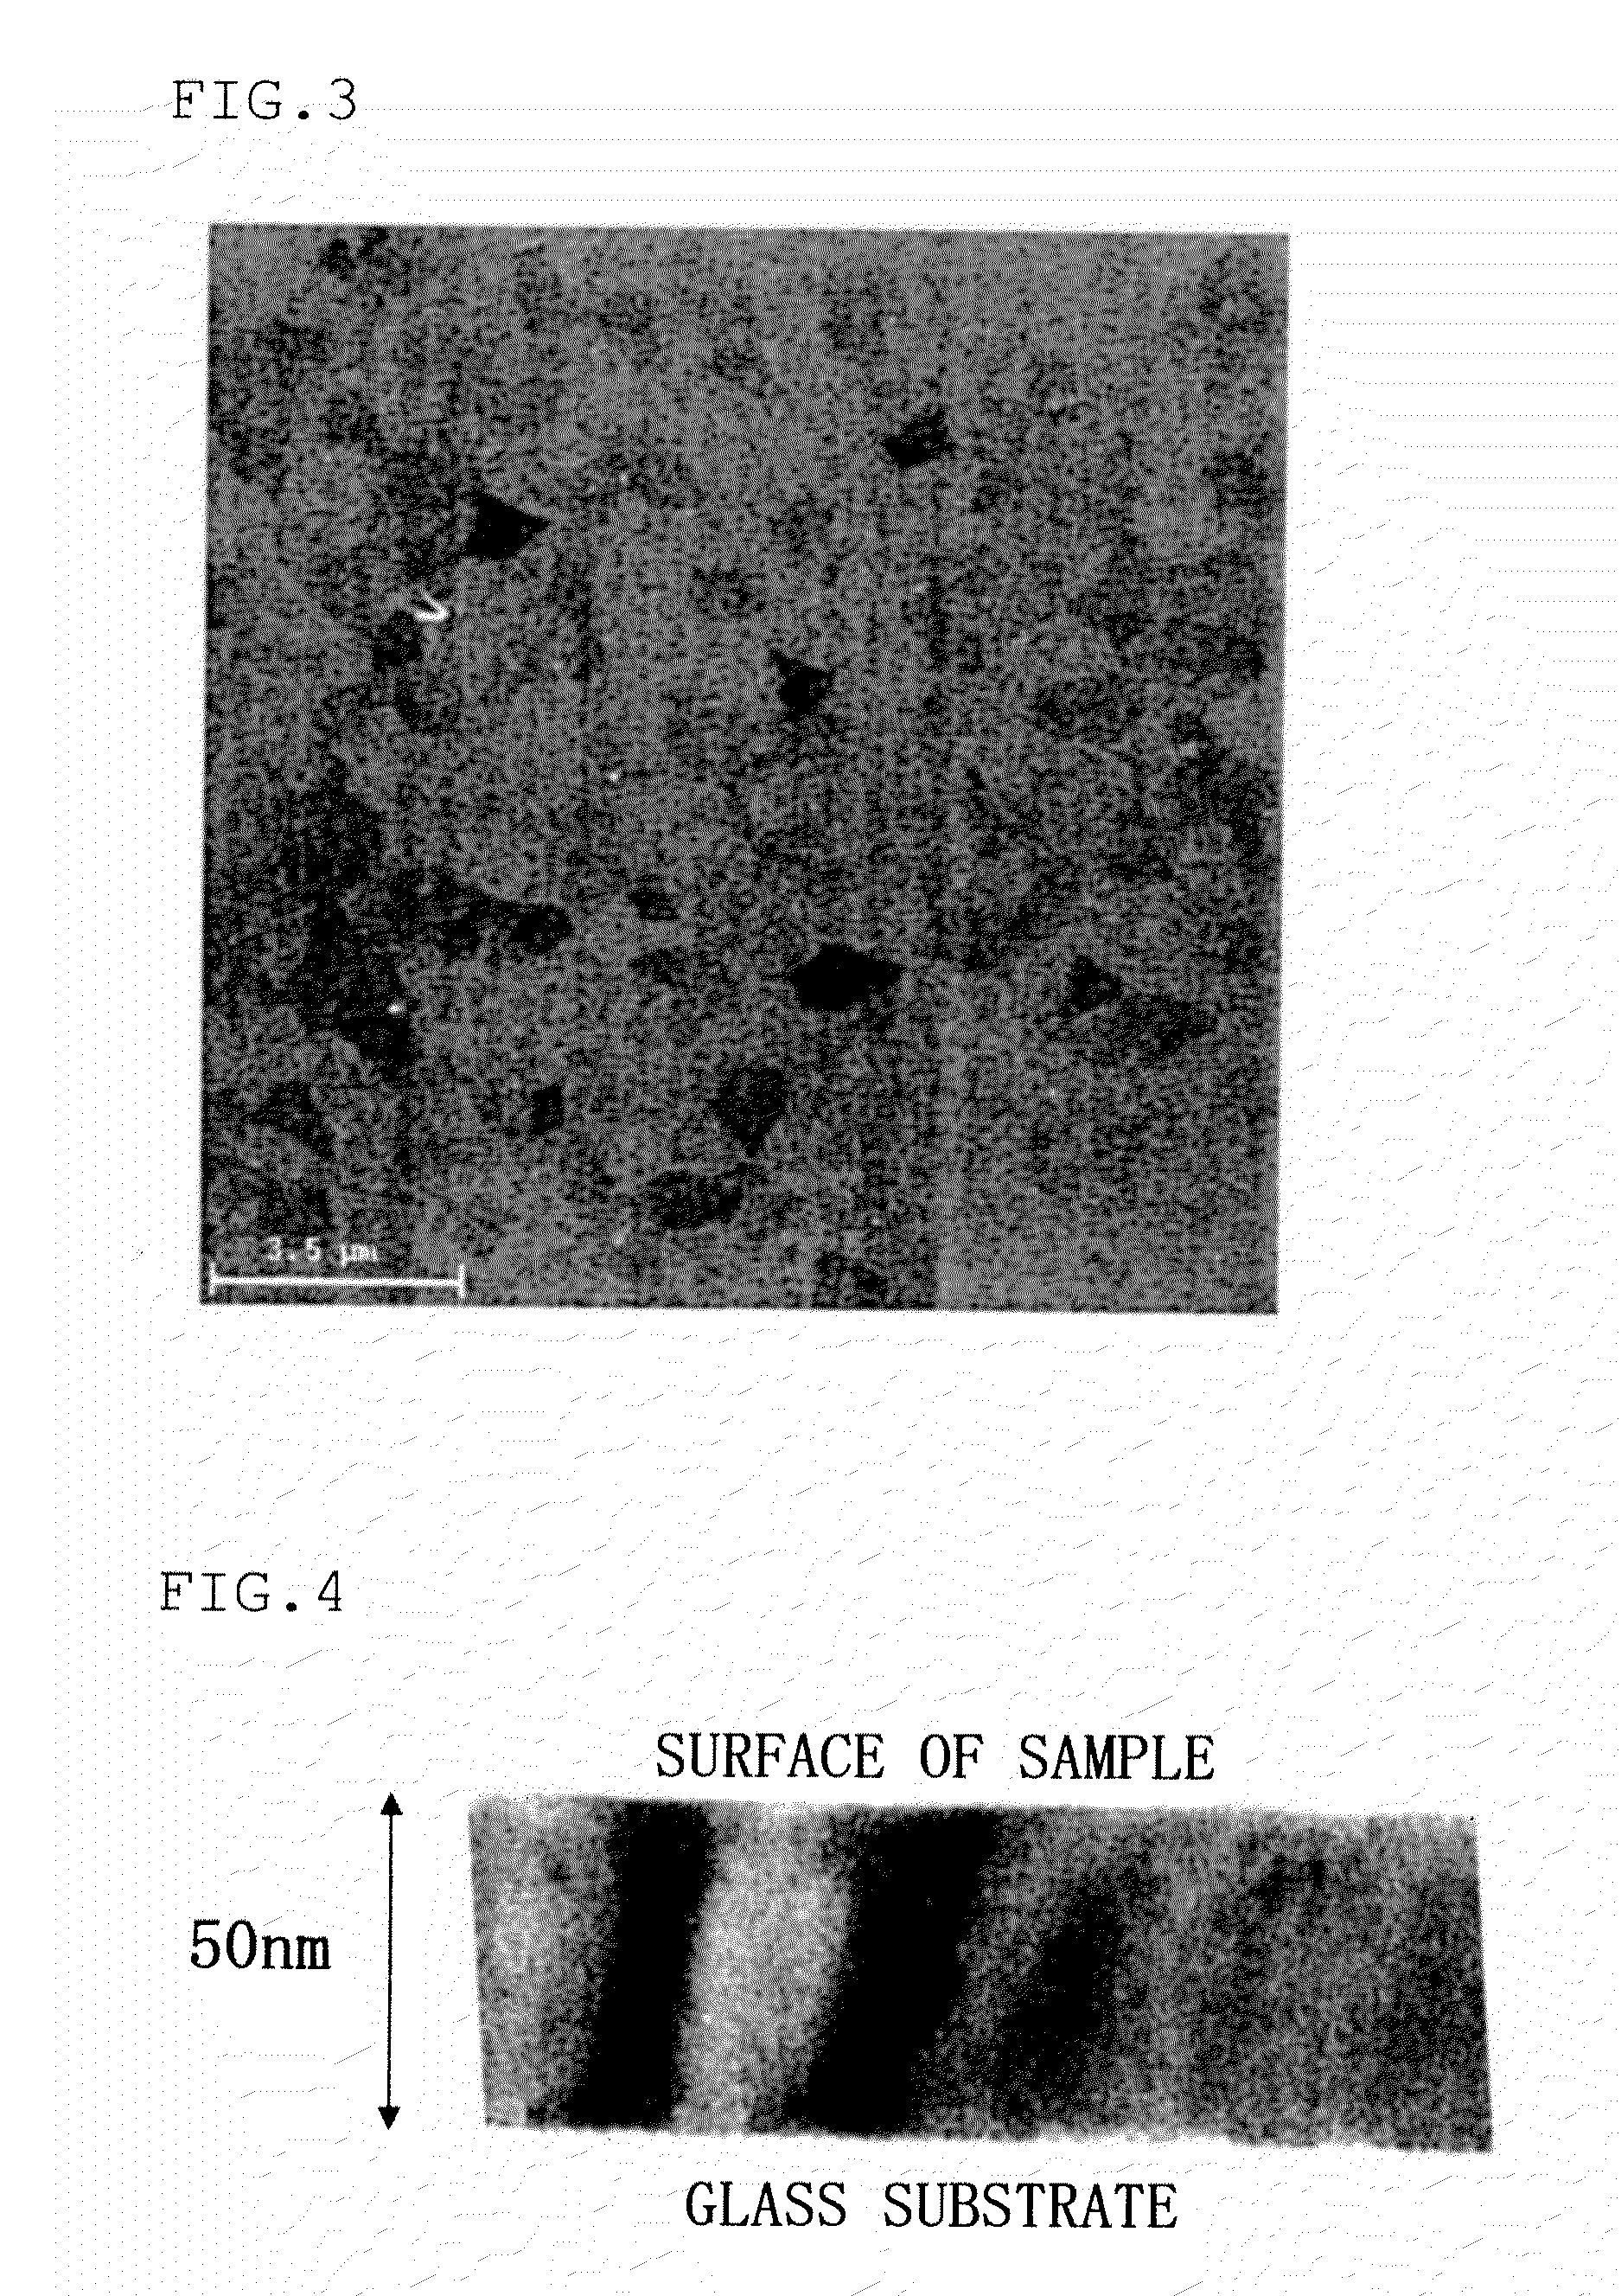 Laminate structure including oxide semiconductor thin film layer, and thin film transistor